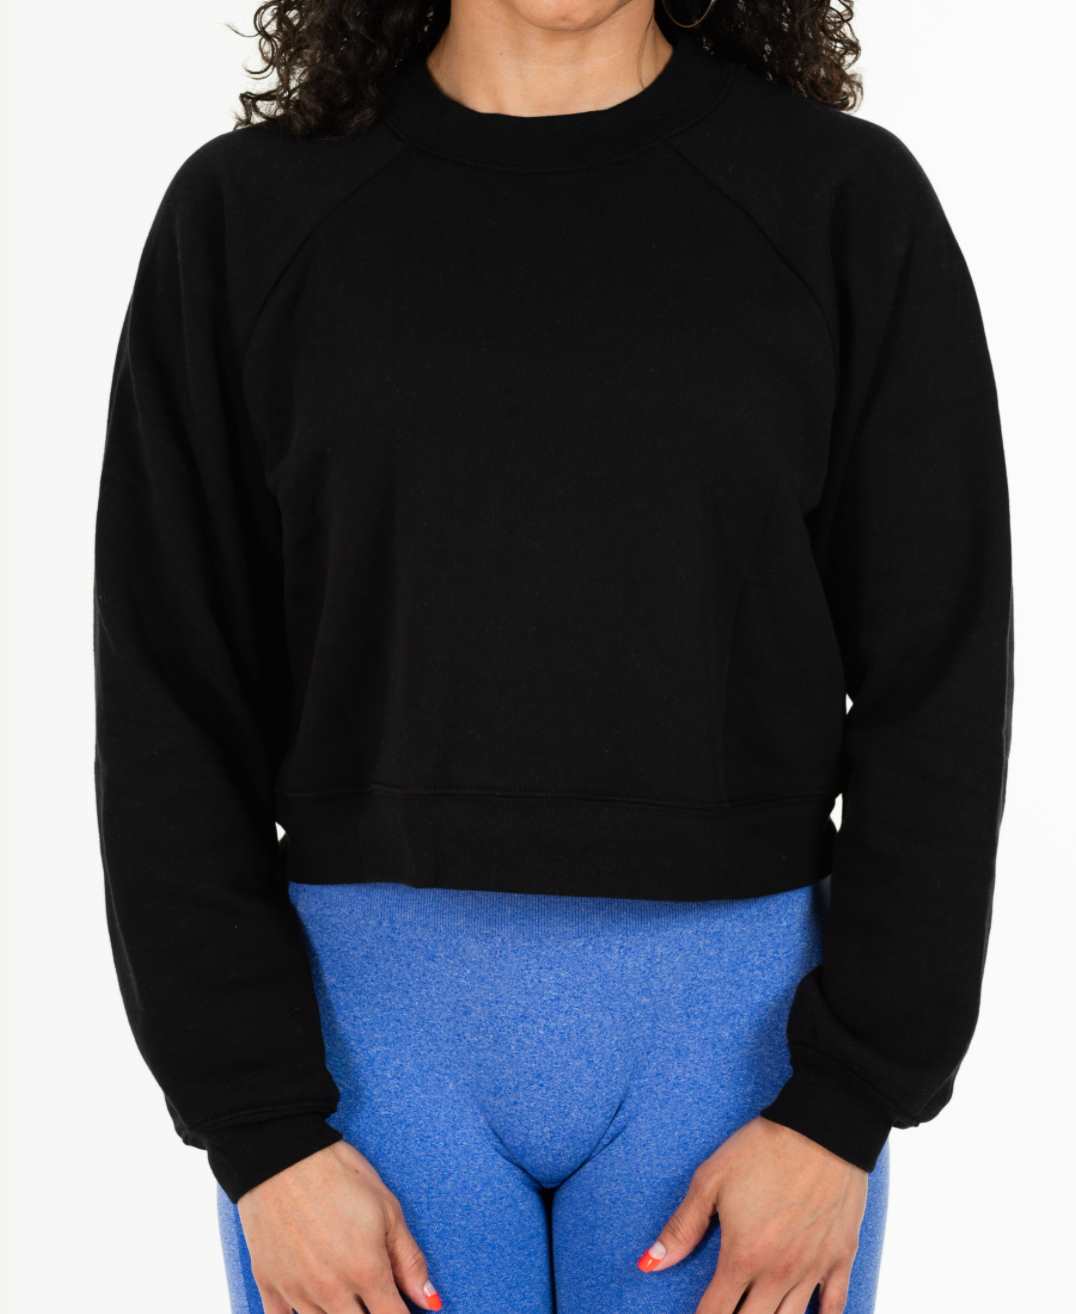 CURVES & CRAVINGS Pullover